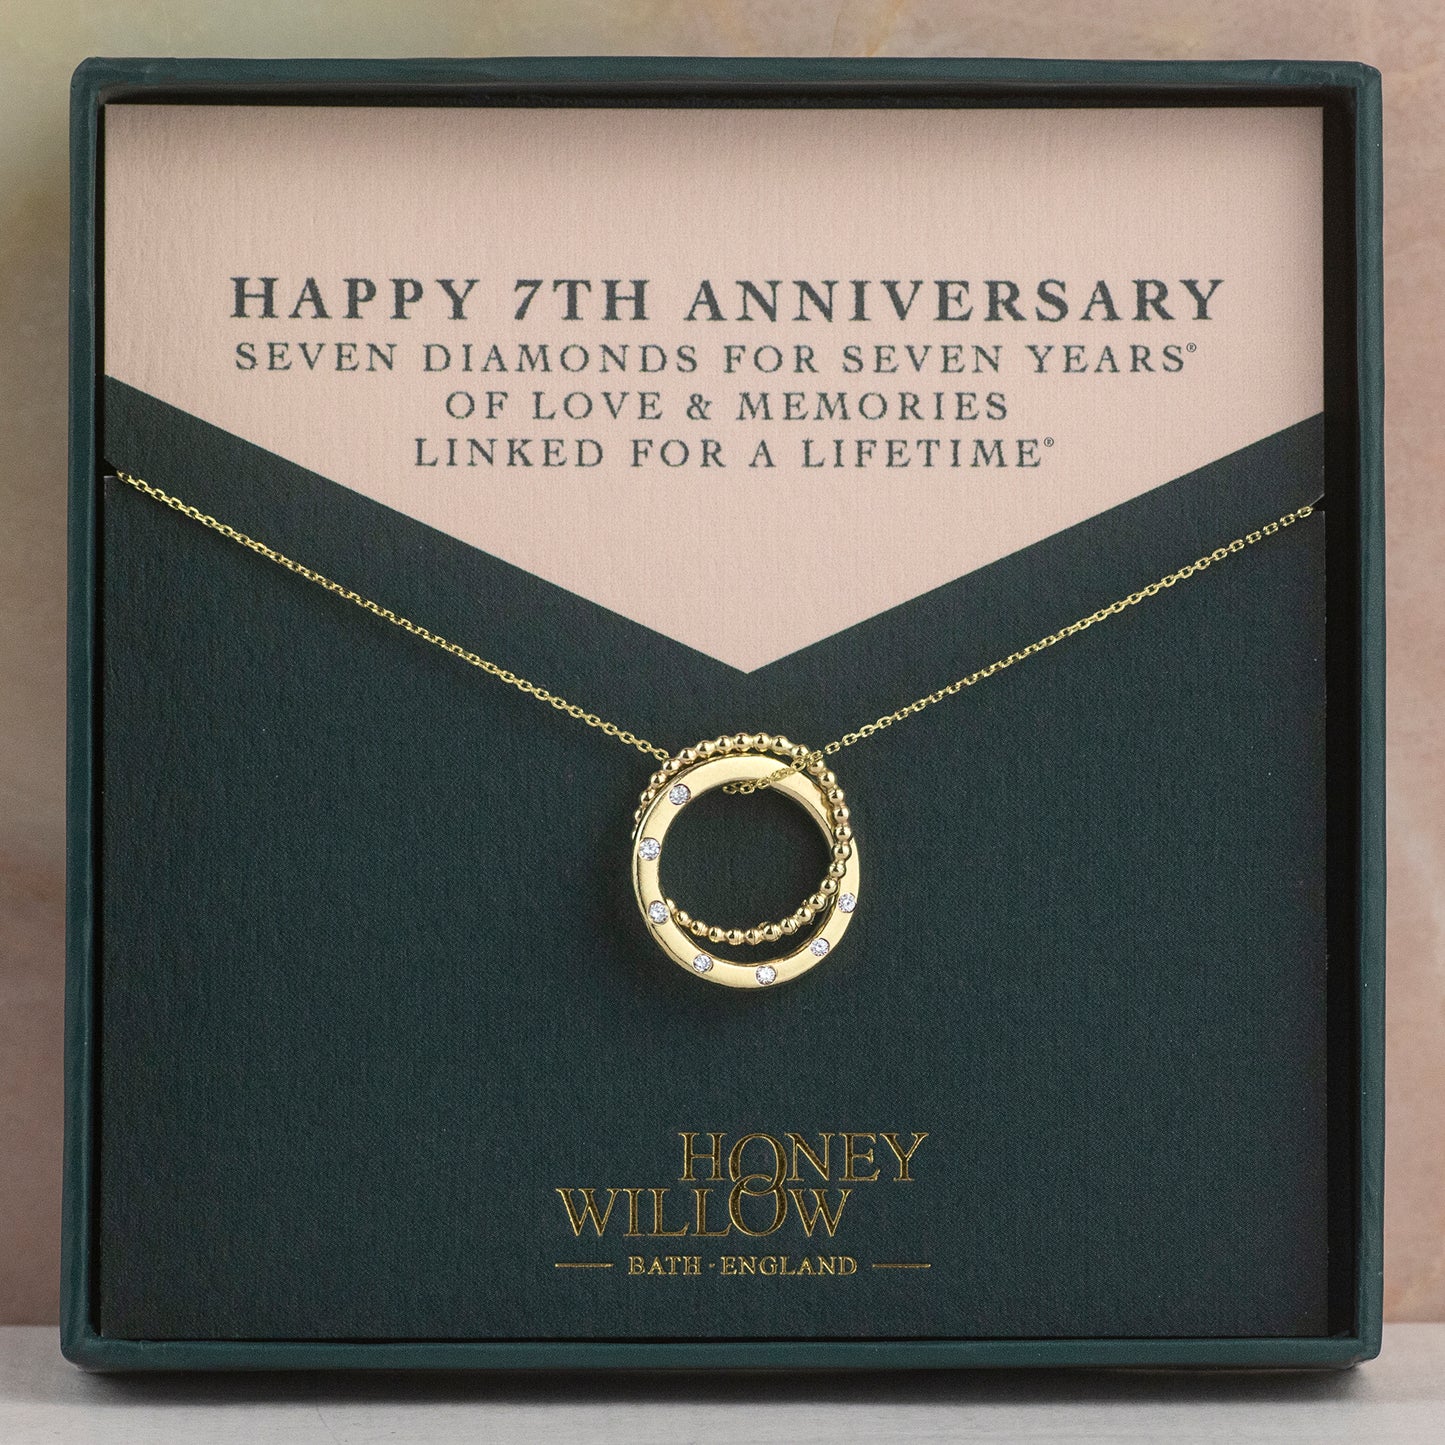 7th Anniversary Necklace - 7 Diamonds for 7 Years - 9kt Gold